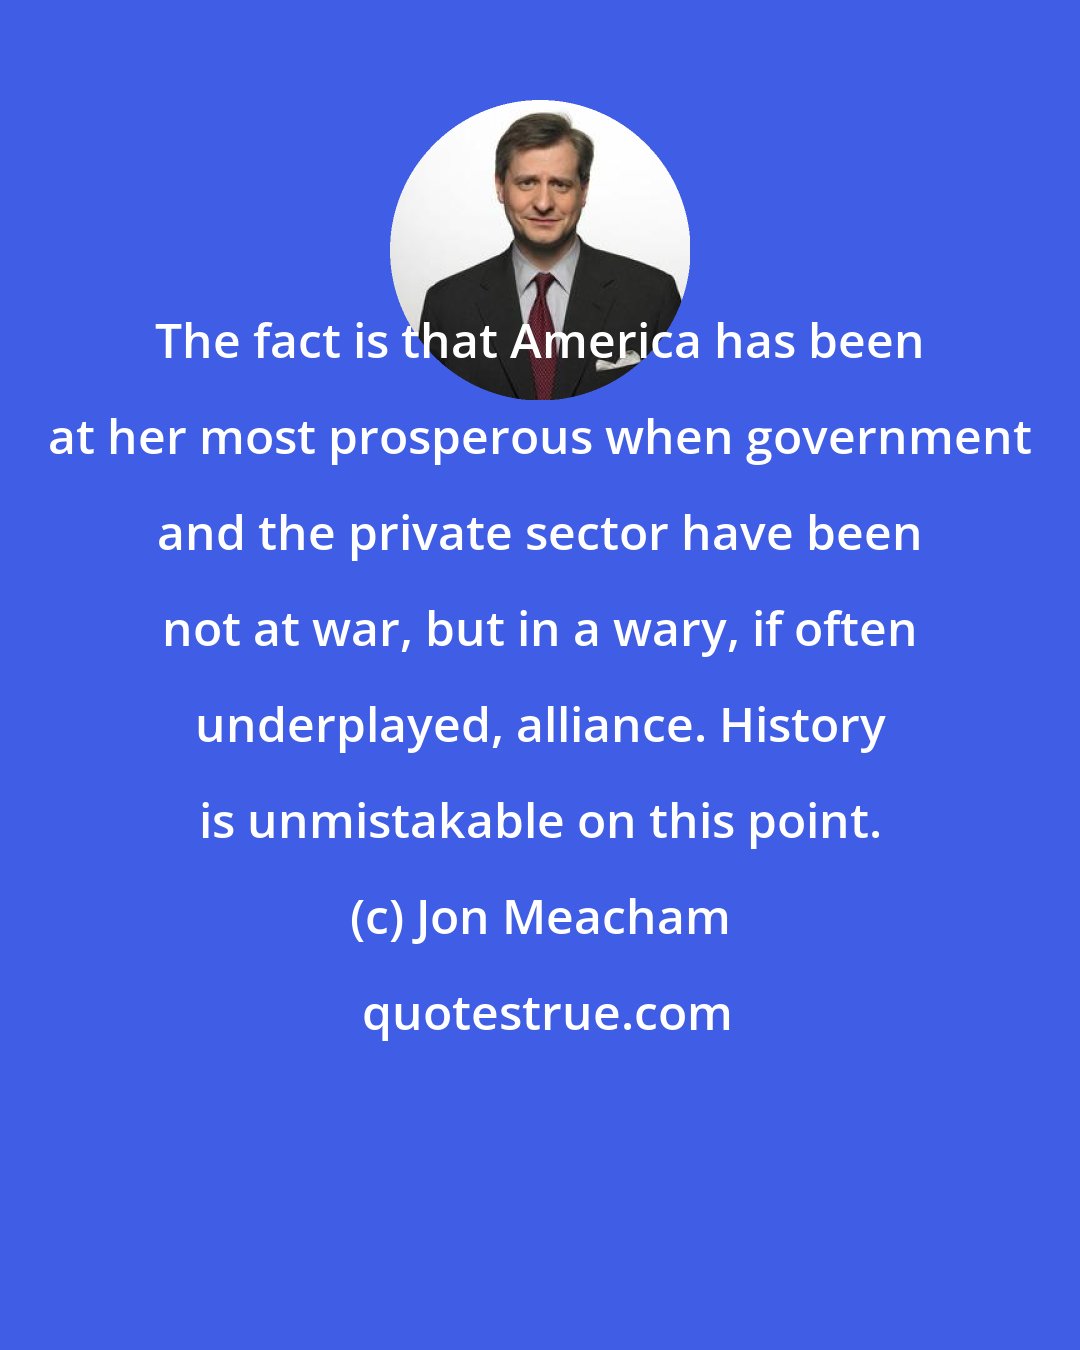 Jon Meacham: The fact is that America has been at her most prosperous when government and the private sector have been not at war, but in a wary, if often underplayed, alliance. History is unmistakable on this point.